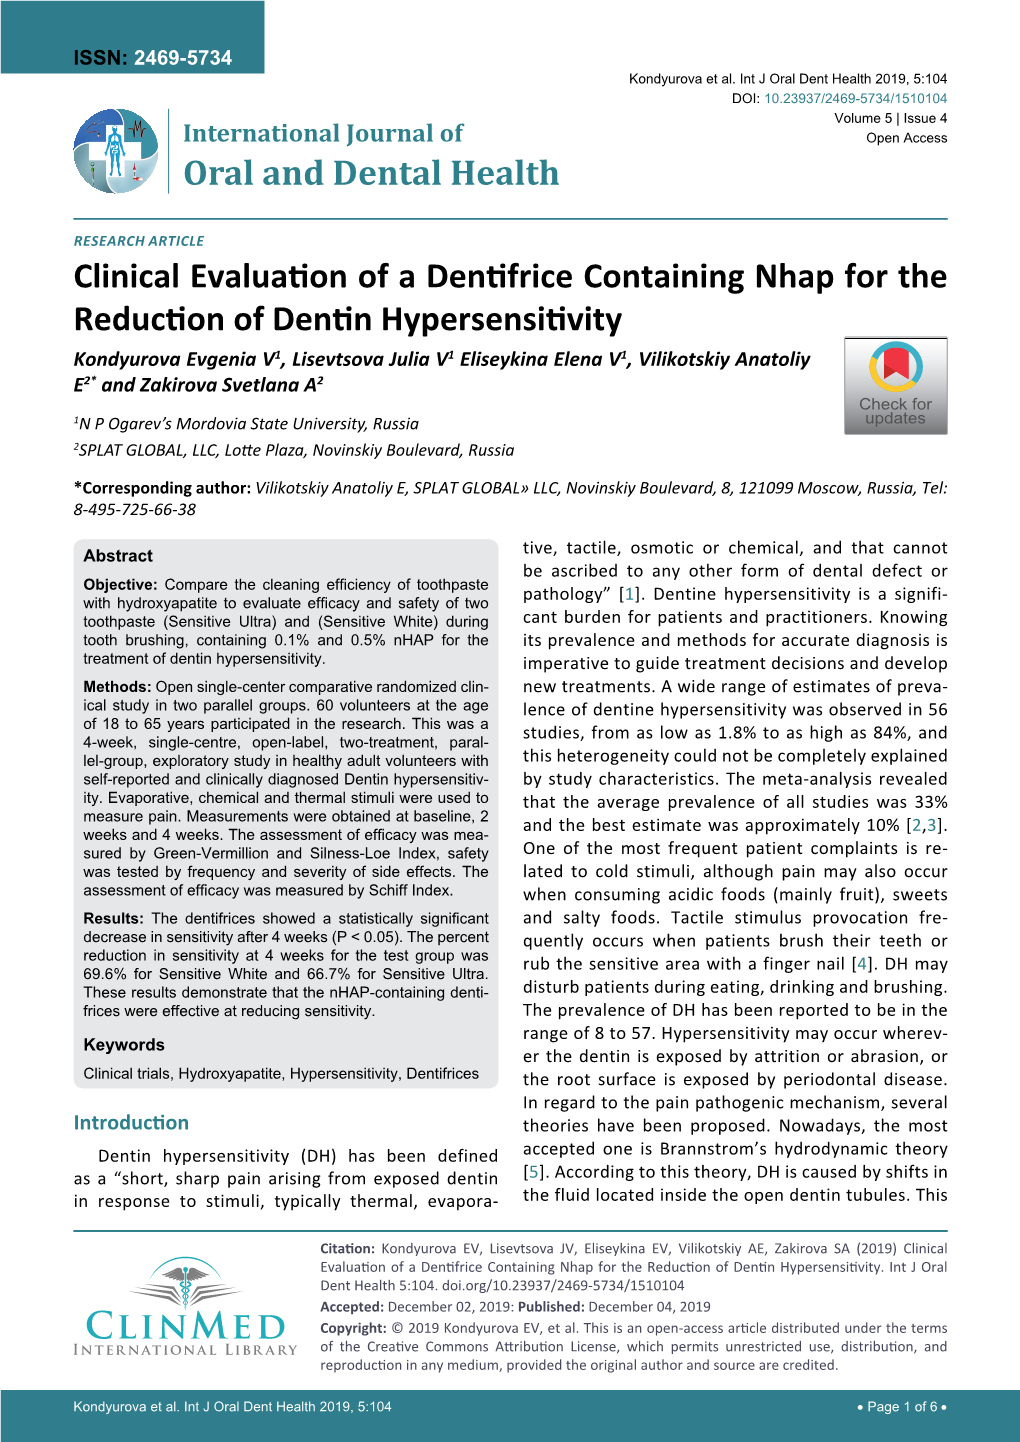 Clinical Evaluation of a Dentifrice Containing Nhap for the Reduction